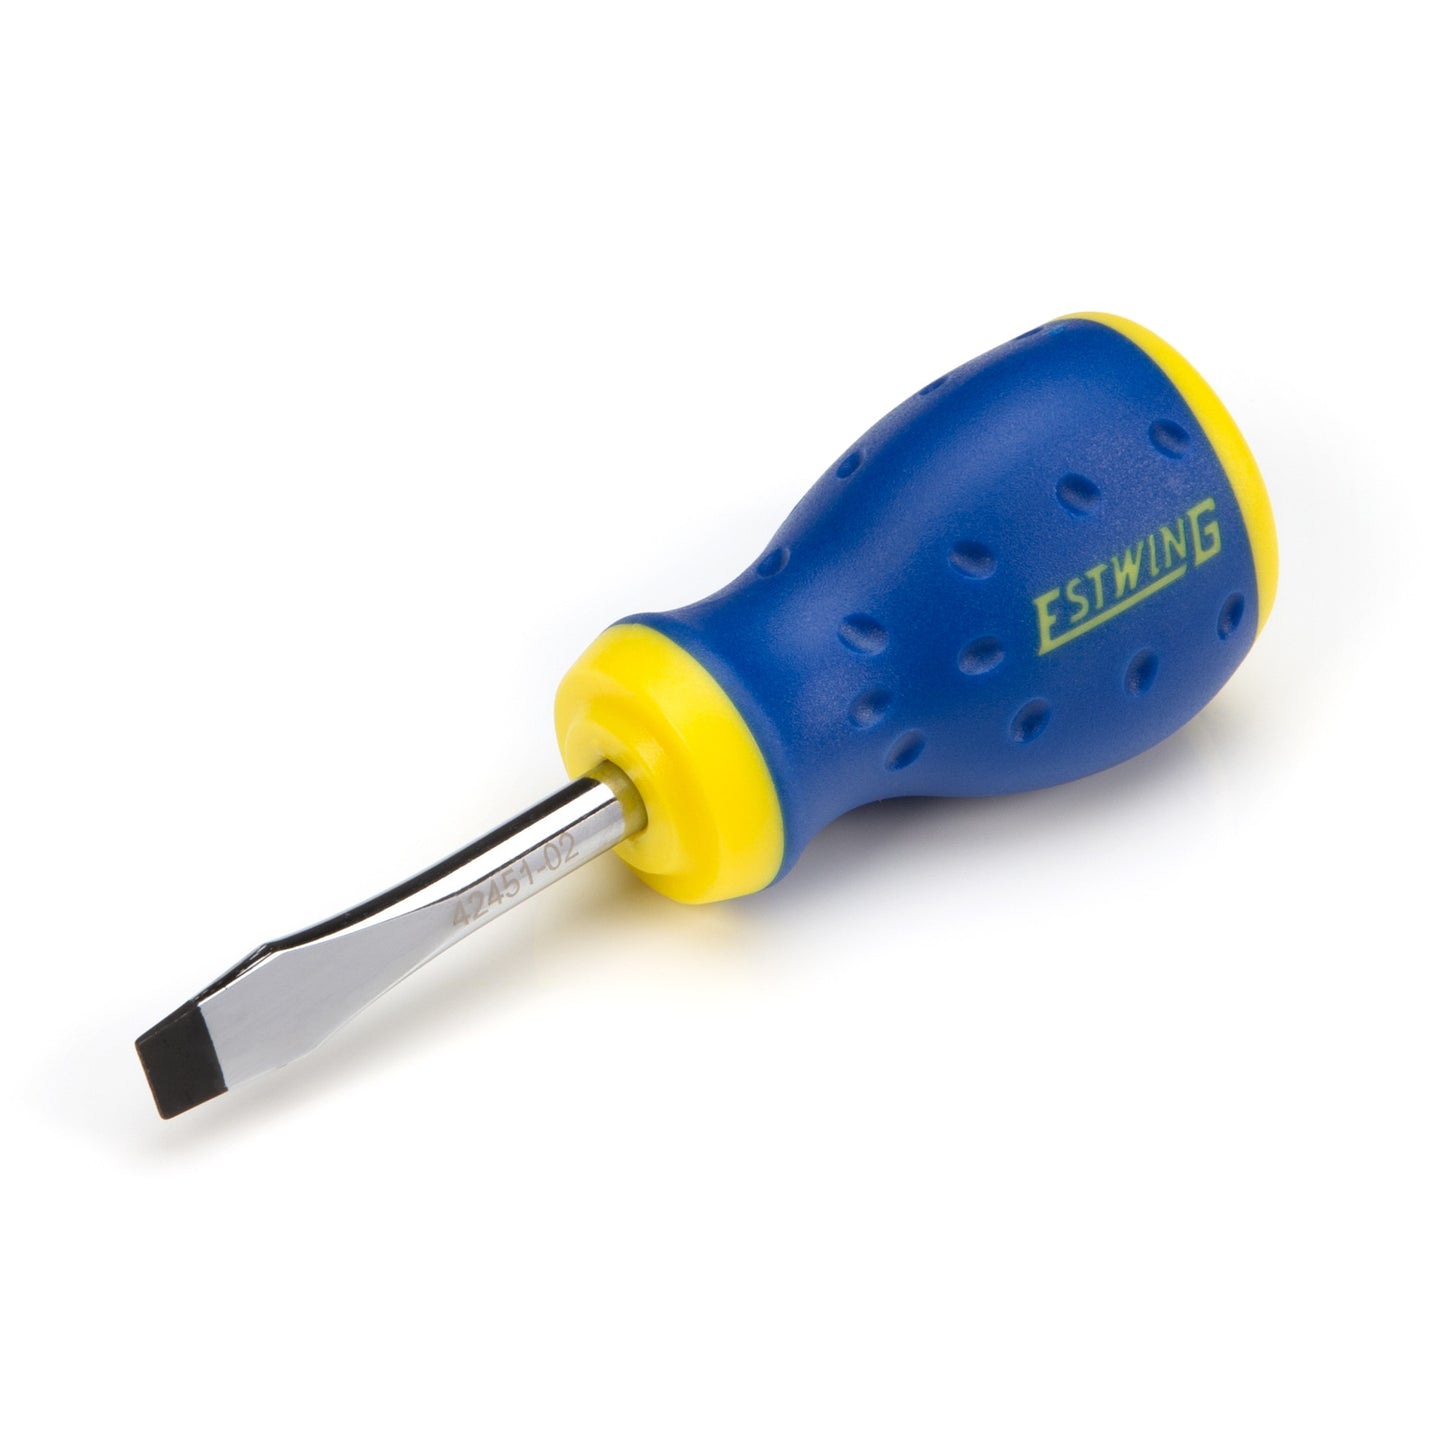 1/4-Inch x 1-3/4-Inch Magnetic Slotted Tip Stubby Screwdriver with Ergonomic Handle